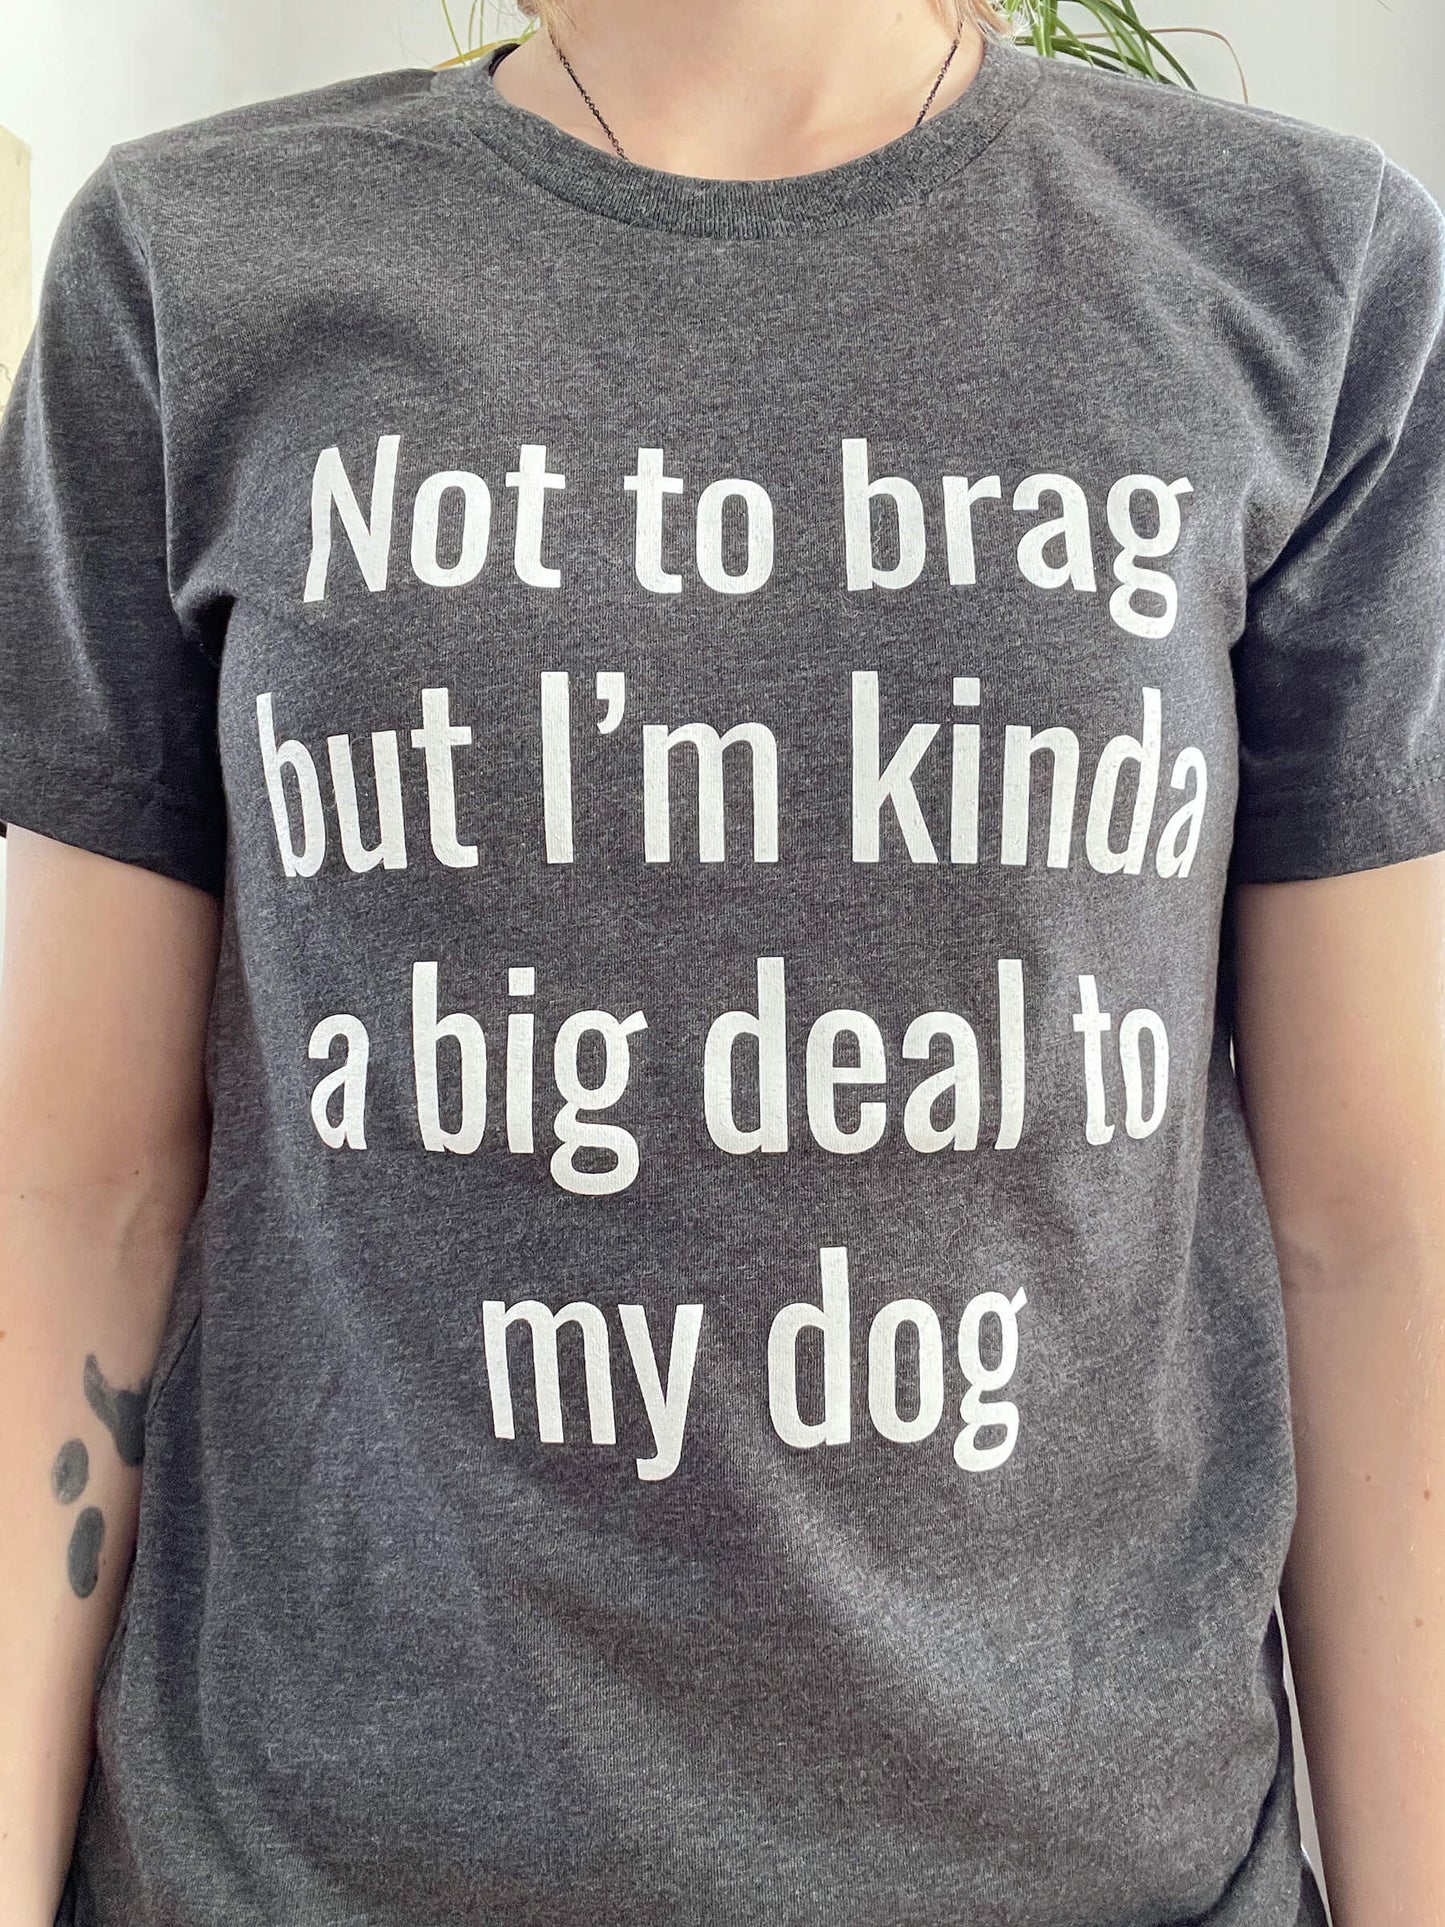 My Dog Thinks I'm a Big Deal, Tank Tops for Women, Funny Shirt